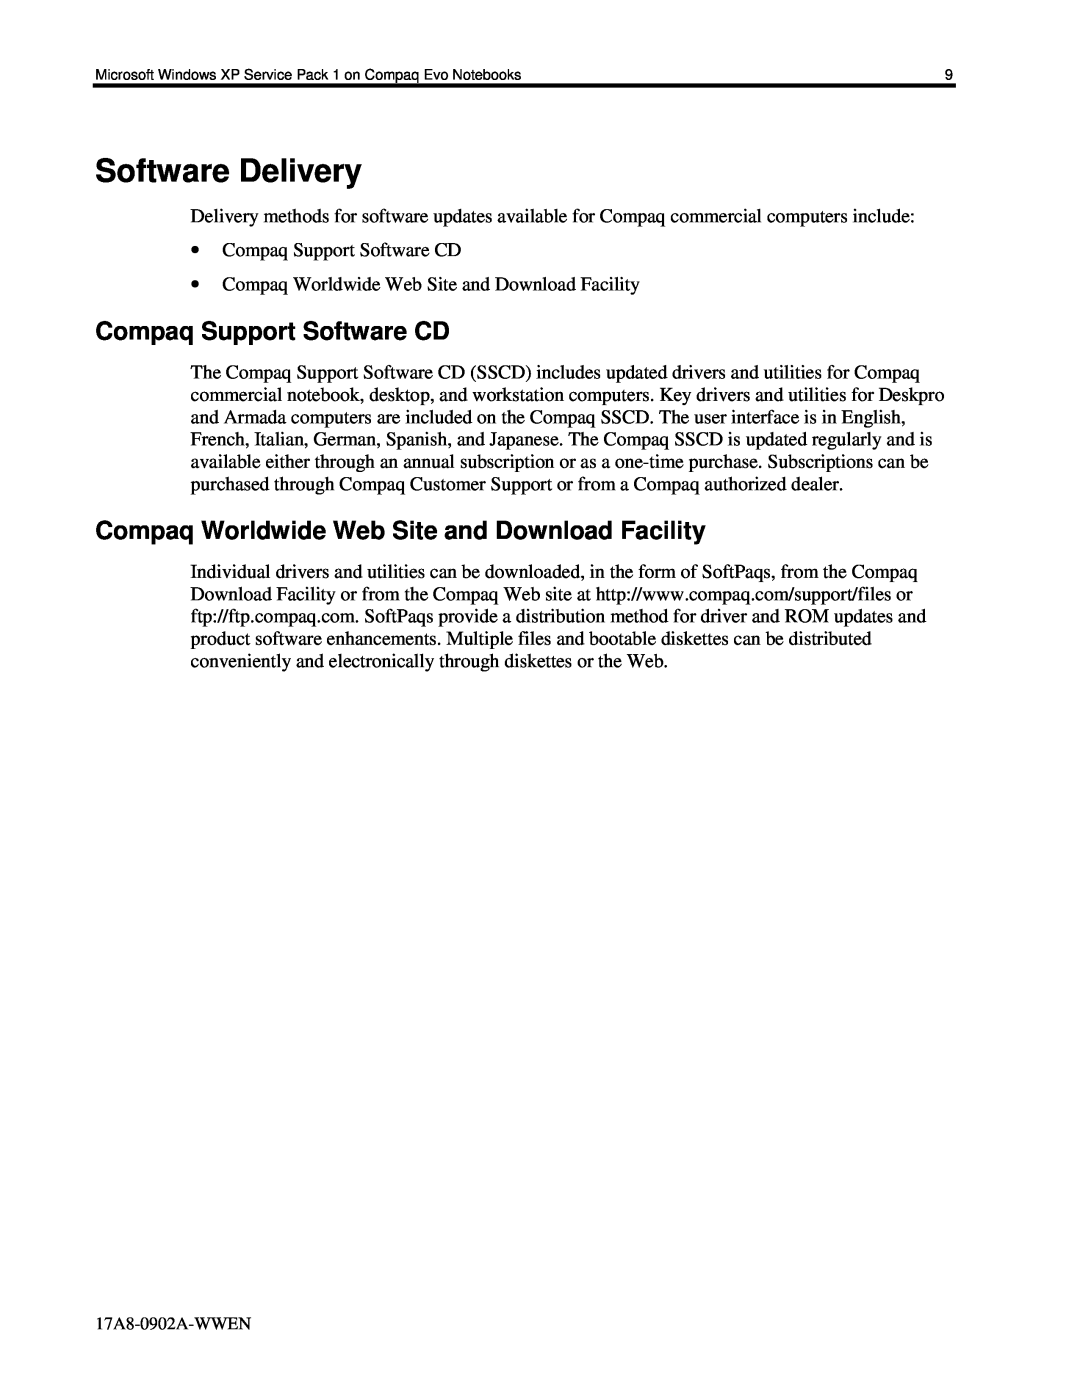 HP n115 manual Software Delivery, Compaq Support Software CD, Compaq Worldwide Web Site and Download Facility 